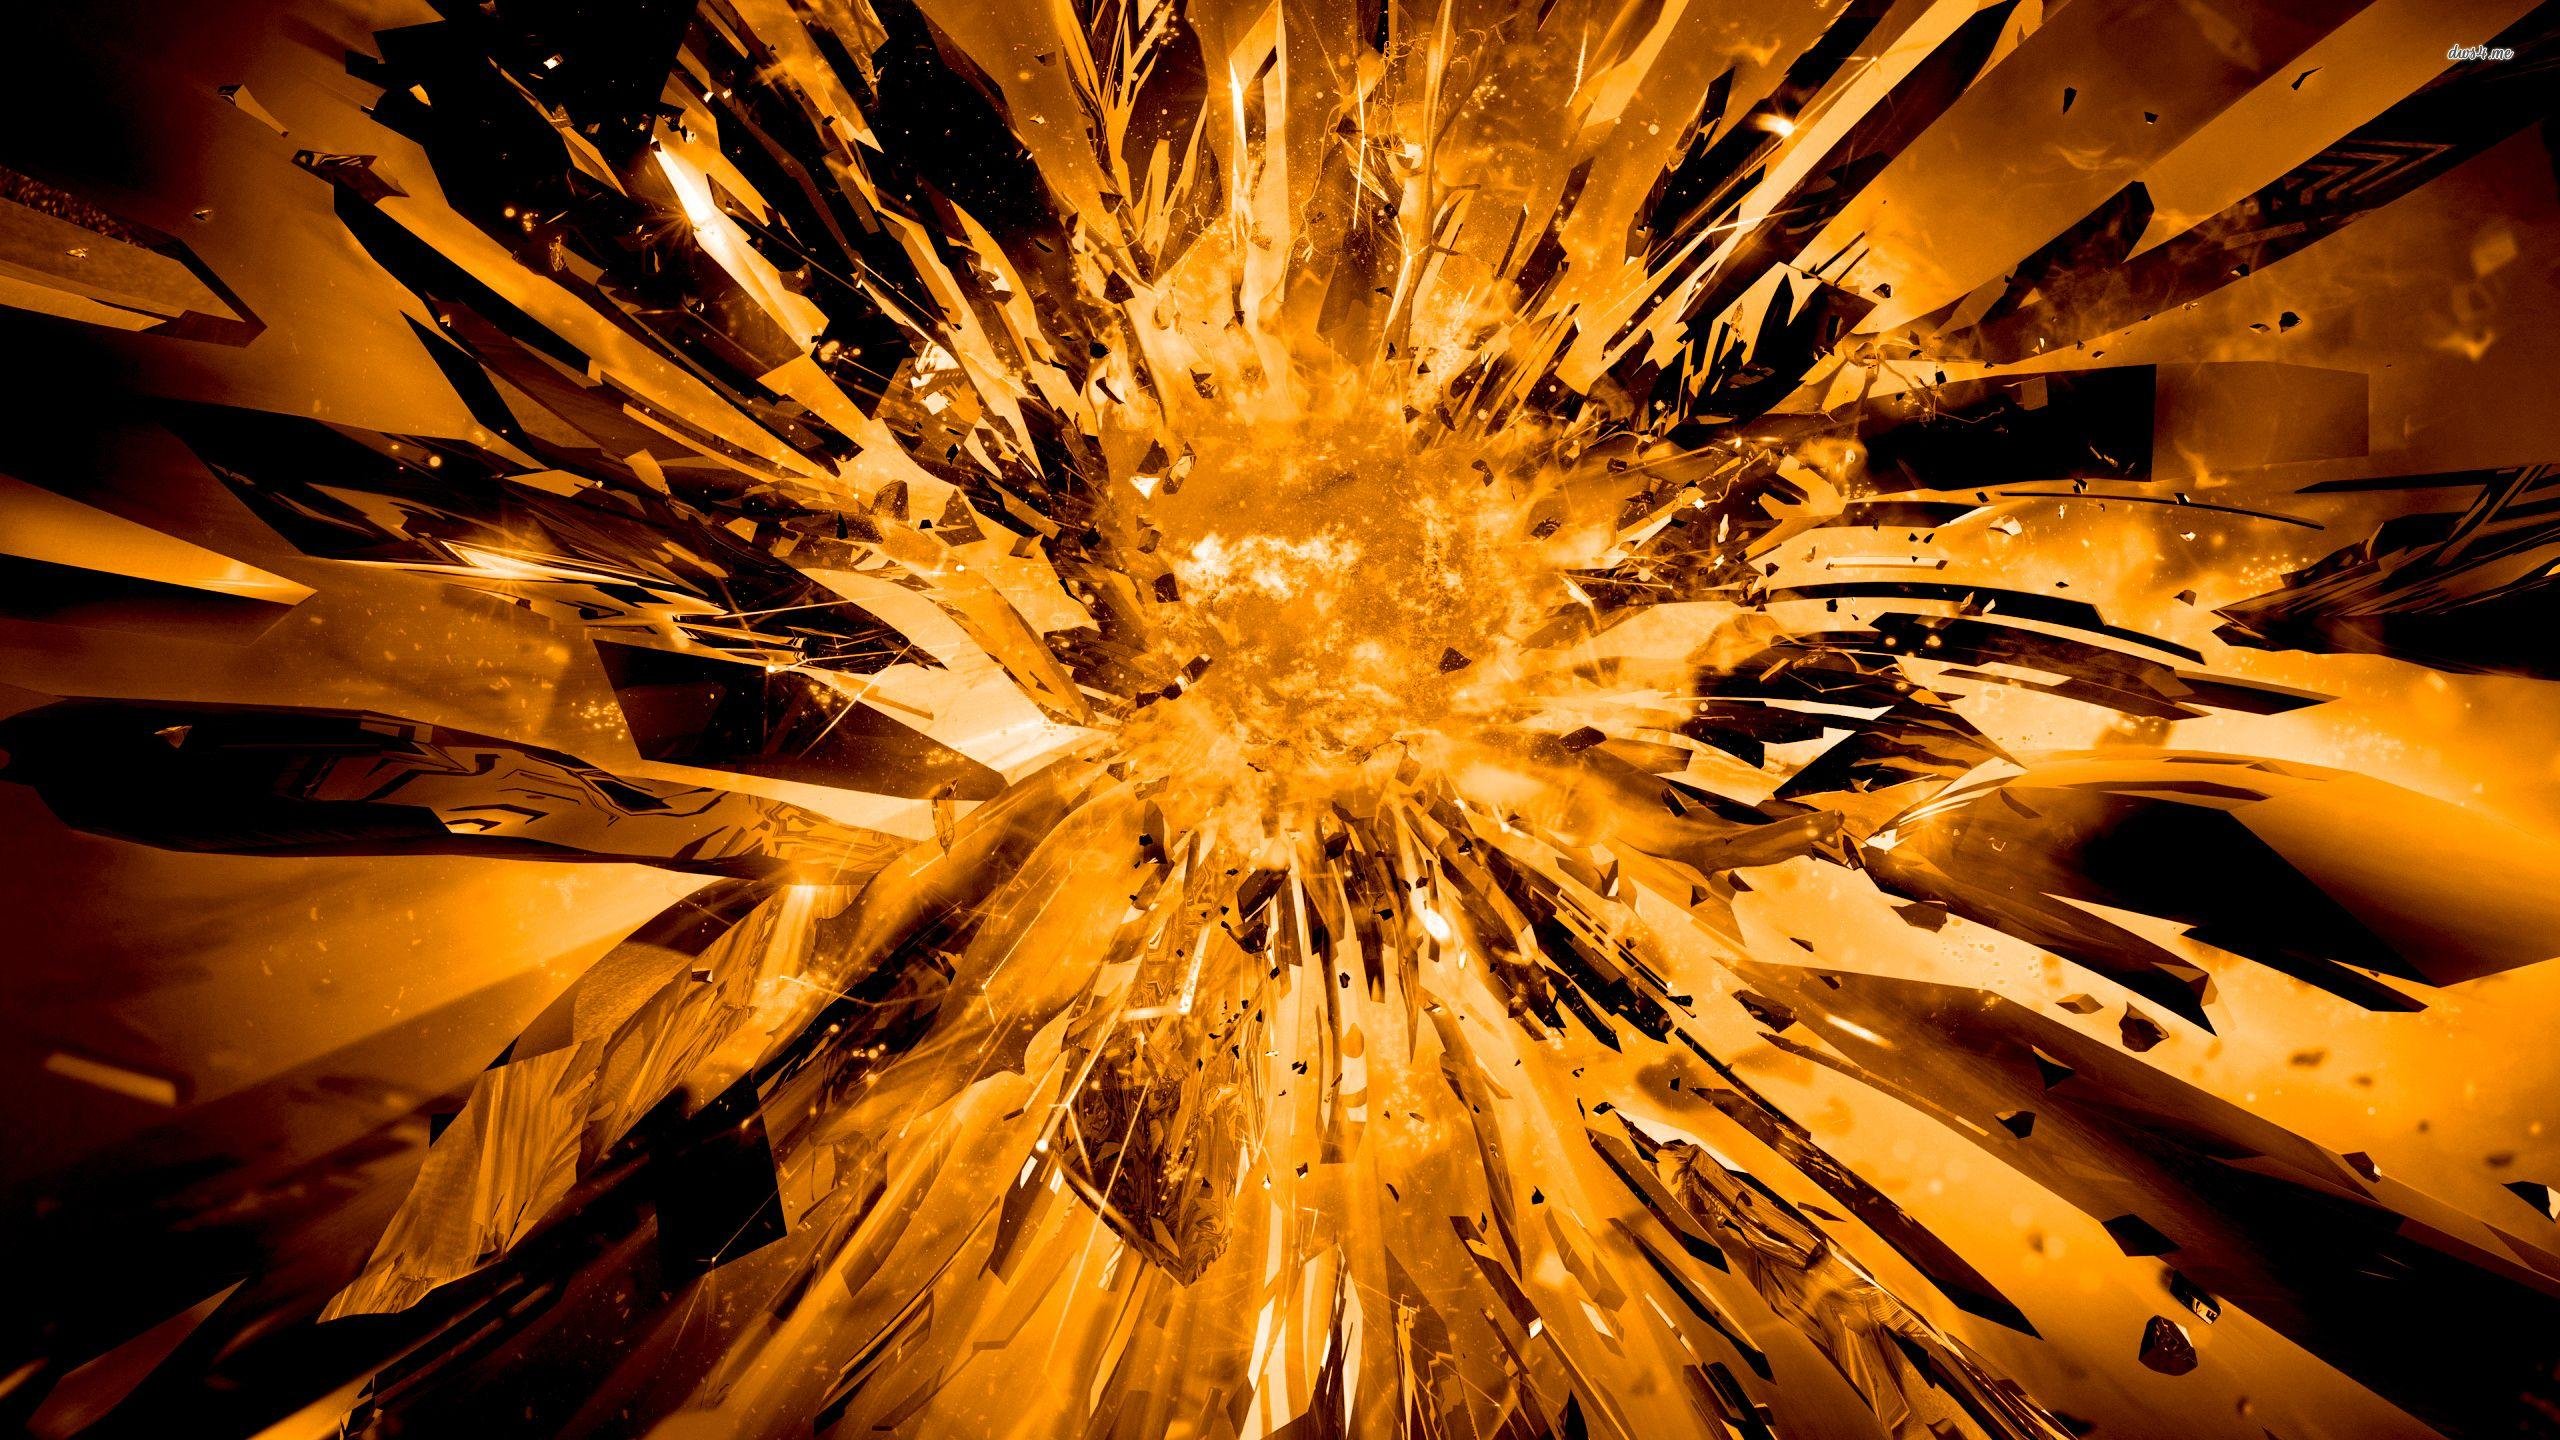 Abstract Explosion Best Wallpaper 